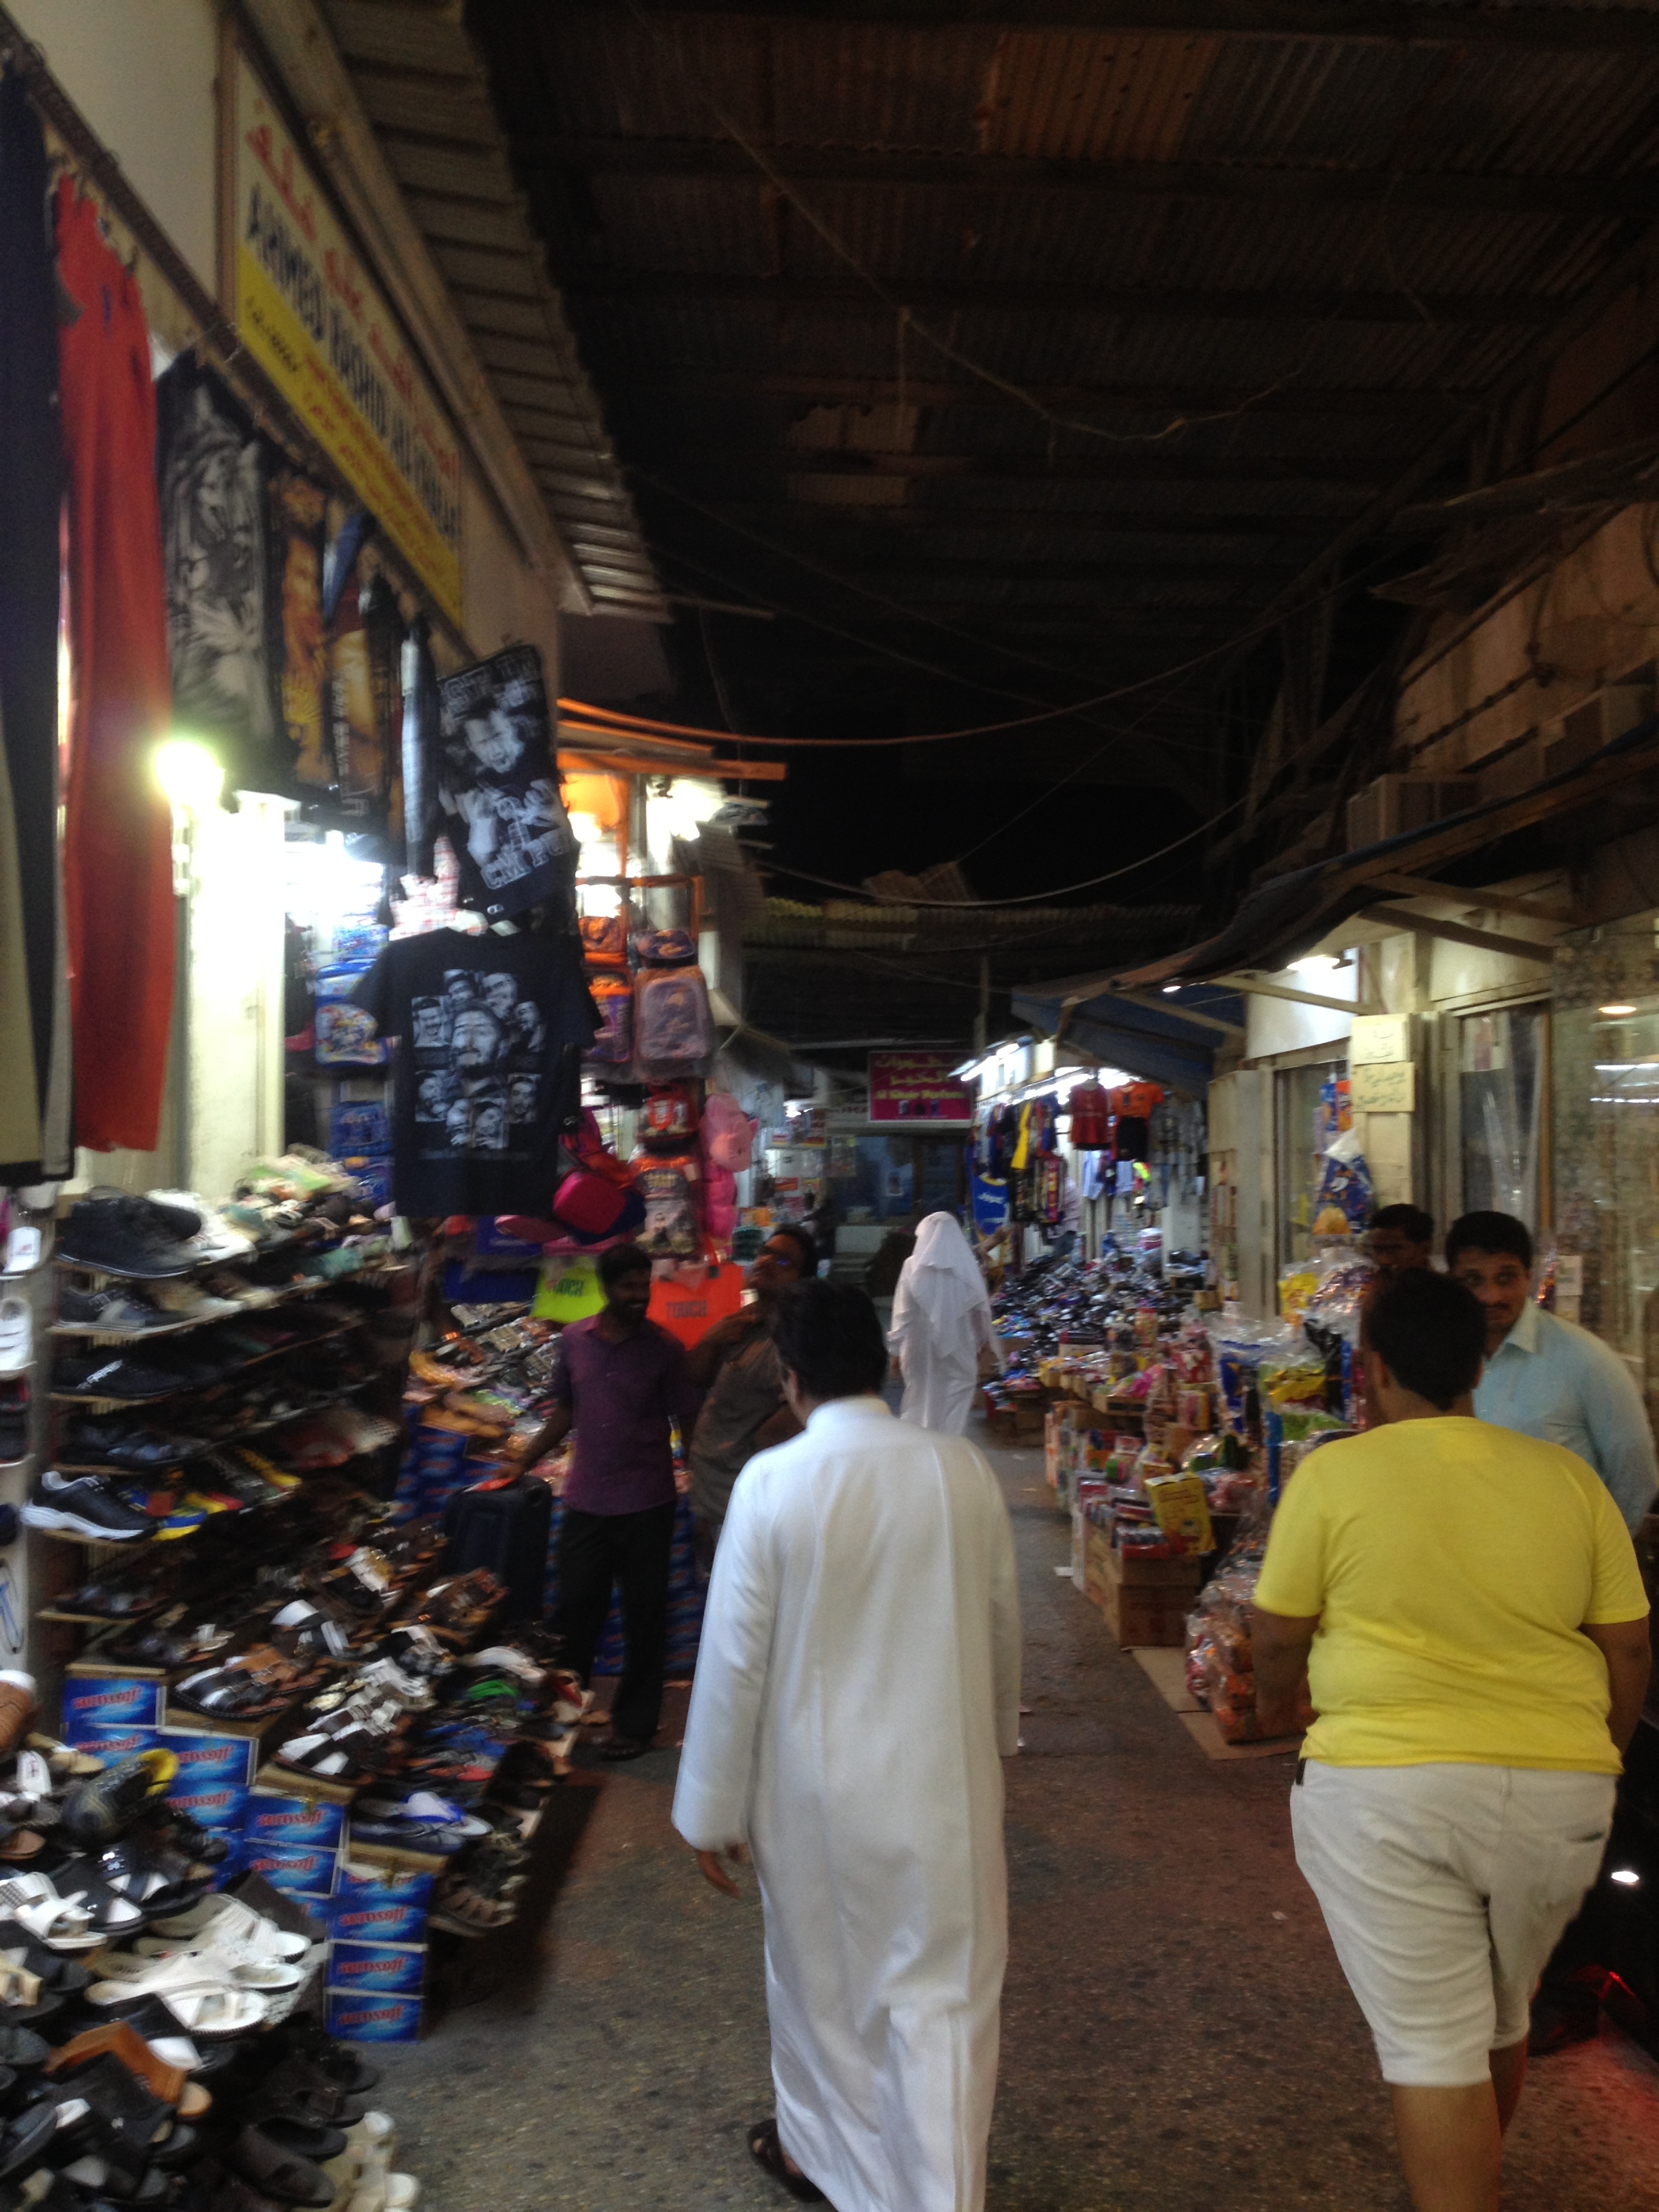 Adventuring through a local market, or souk (سوق) as they call it here.